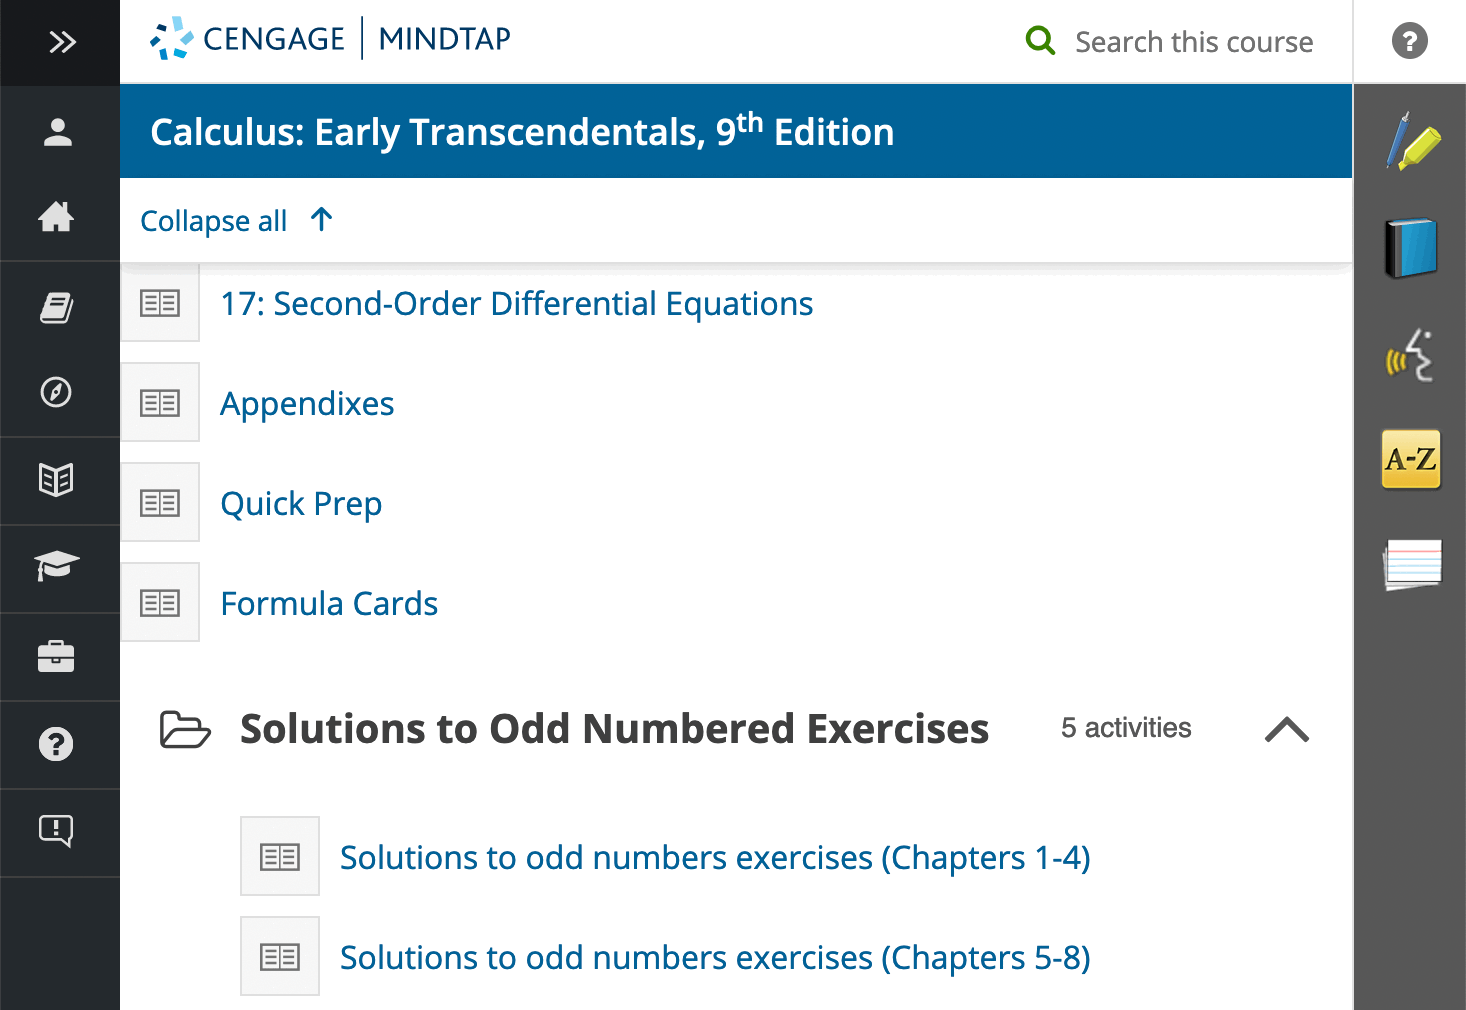 Screenshot of MindTap's table of contents with solutions to odd numbered exercises at the bottom.